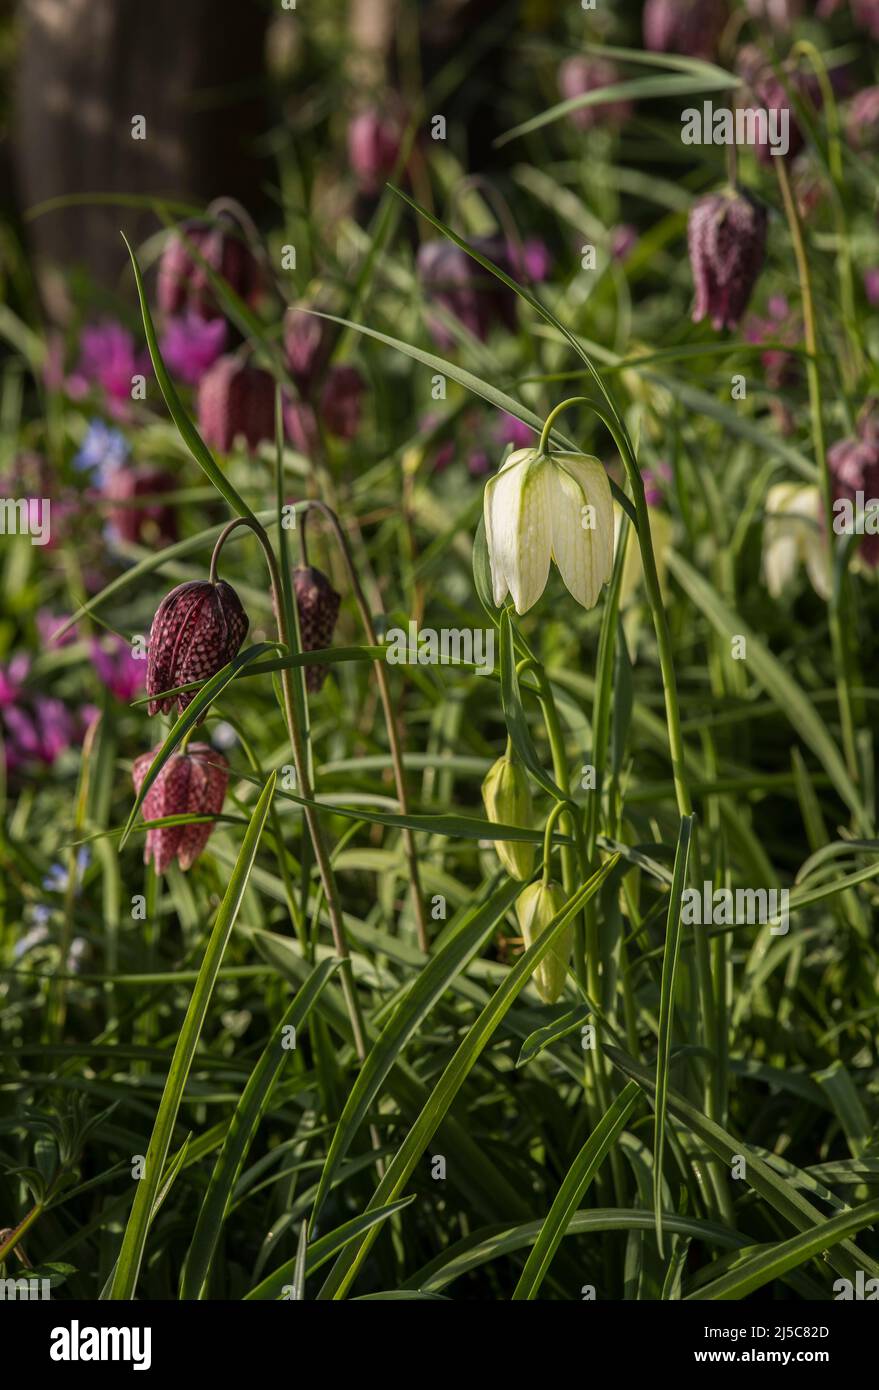 Snake's head Fritillary - Fritillaria Meleagris is a Eurasian species of flowering plant in the lily family (AKA chequered daffodil). Stock Photo